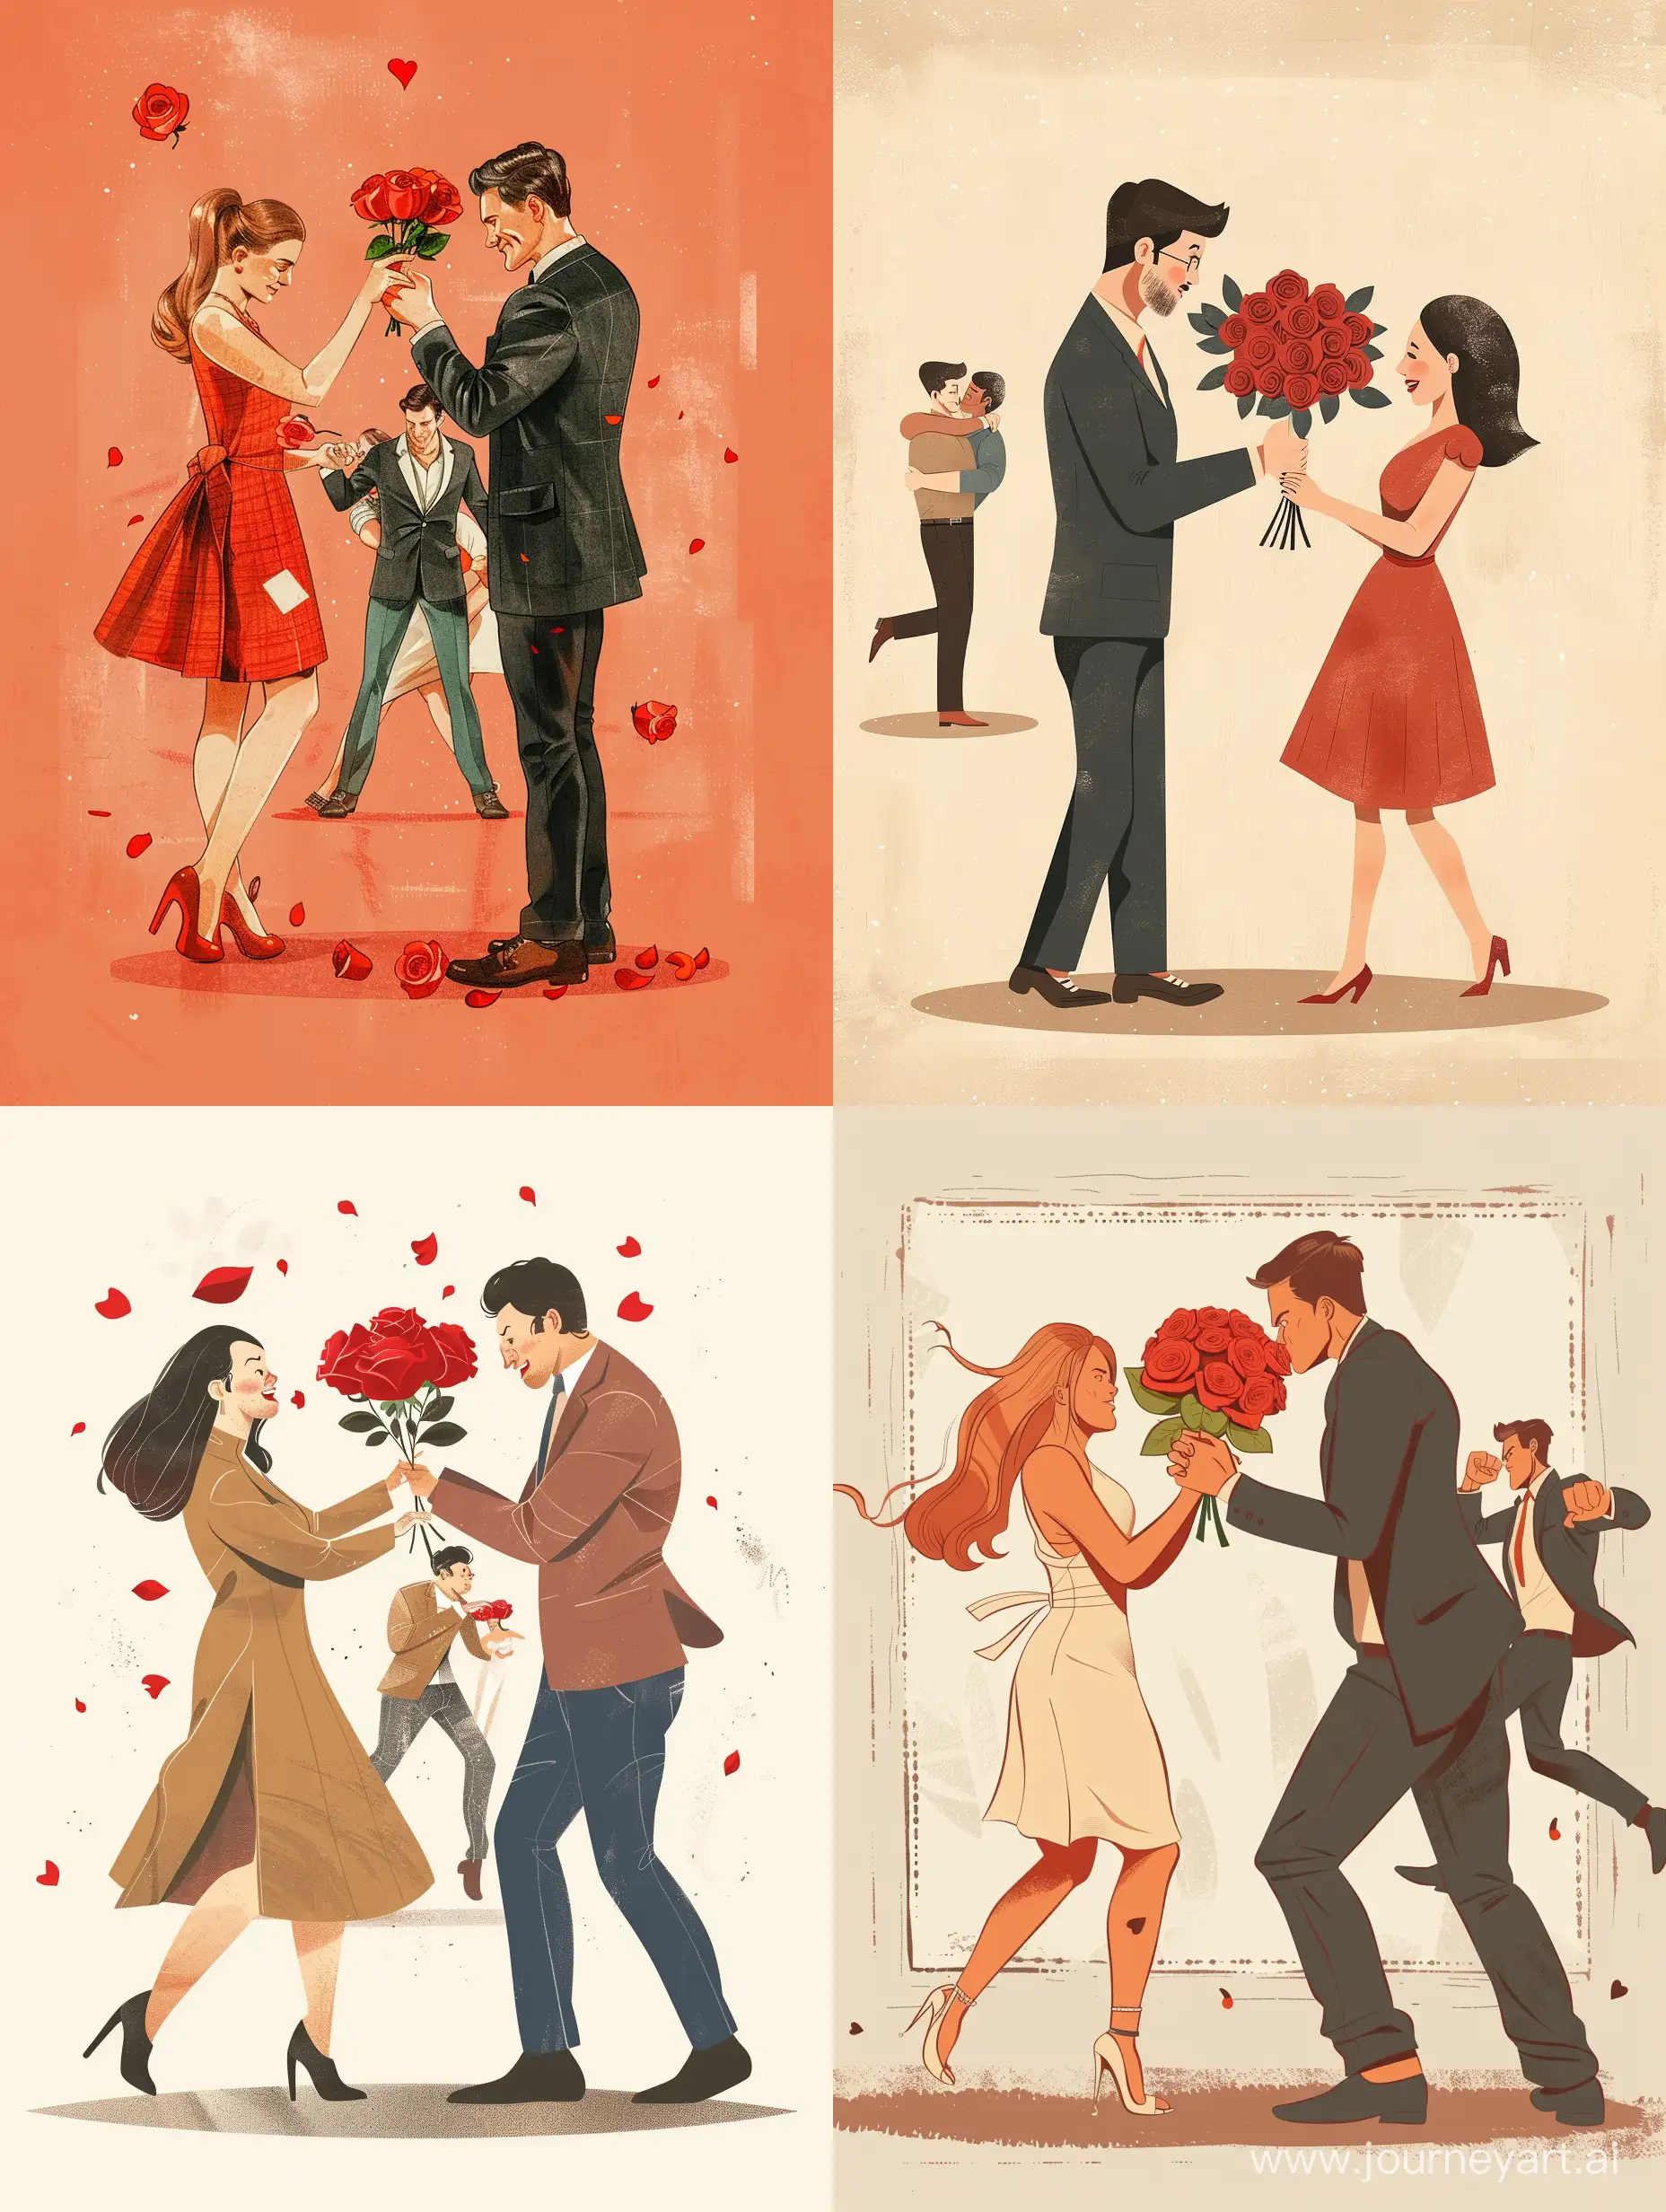 Man proposing a women with red rose bouquet and fighting couple at the back 